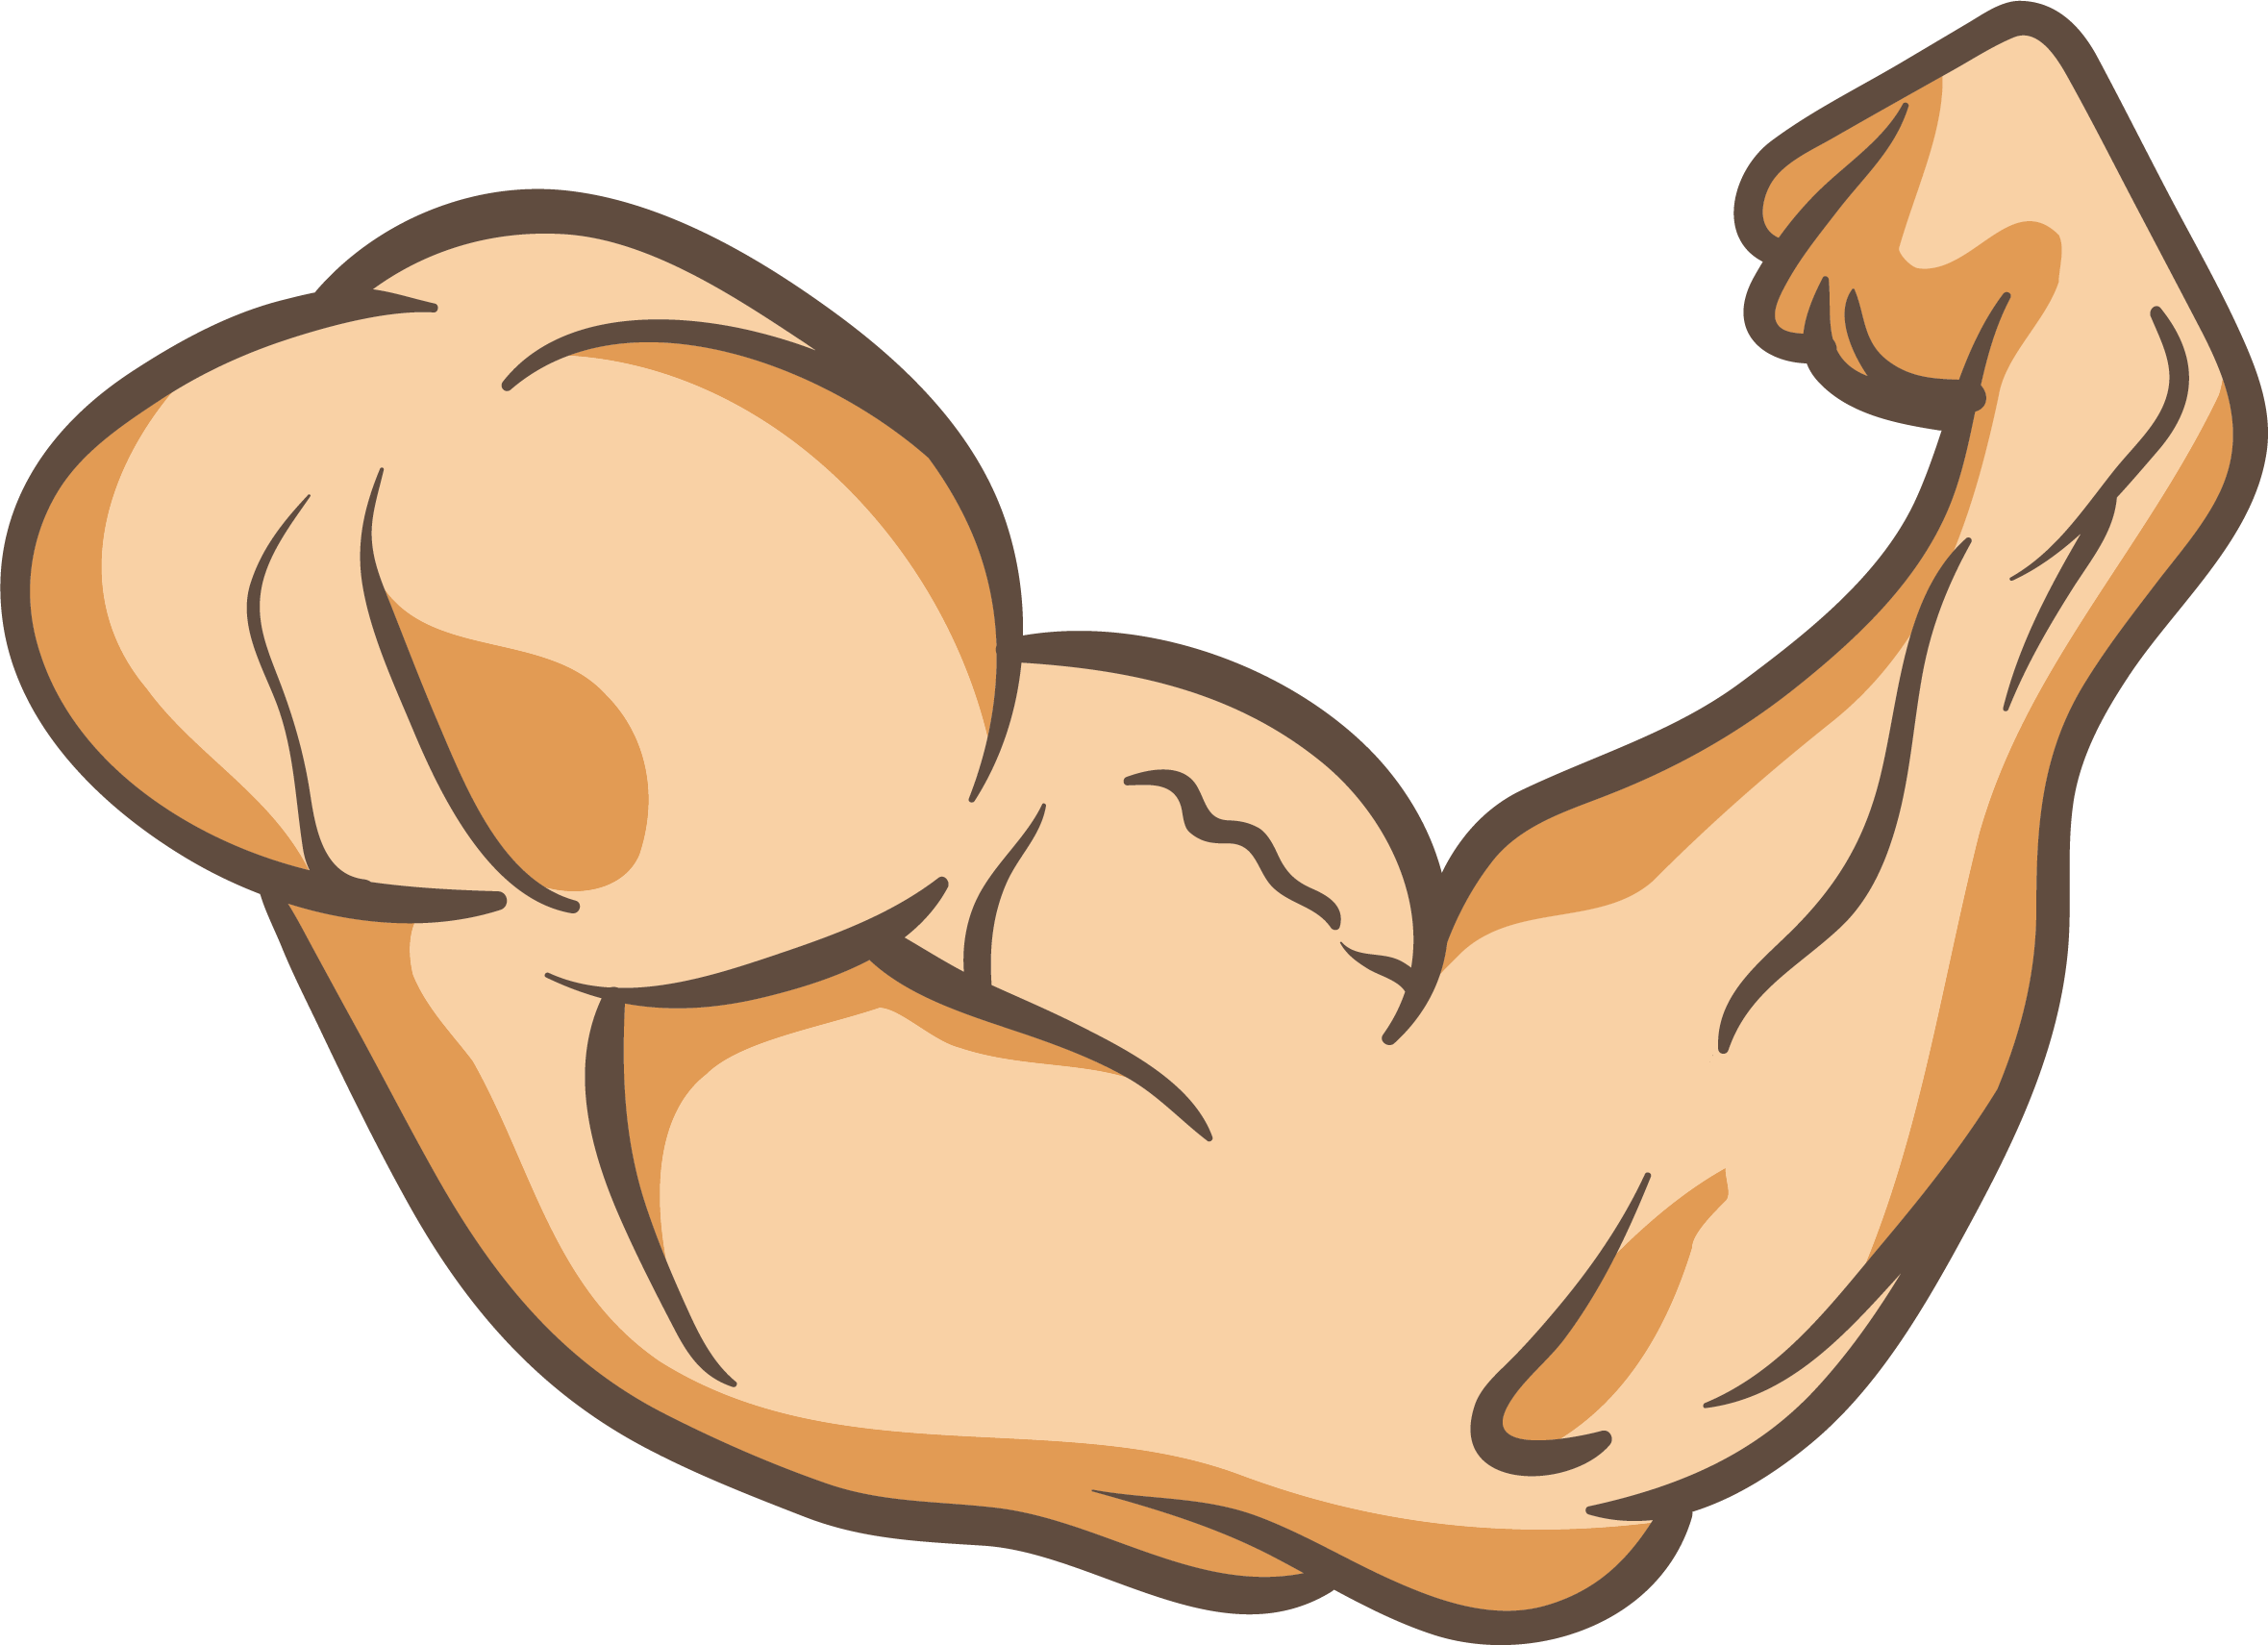 Arms clipart muscle. Thumb clip art a